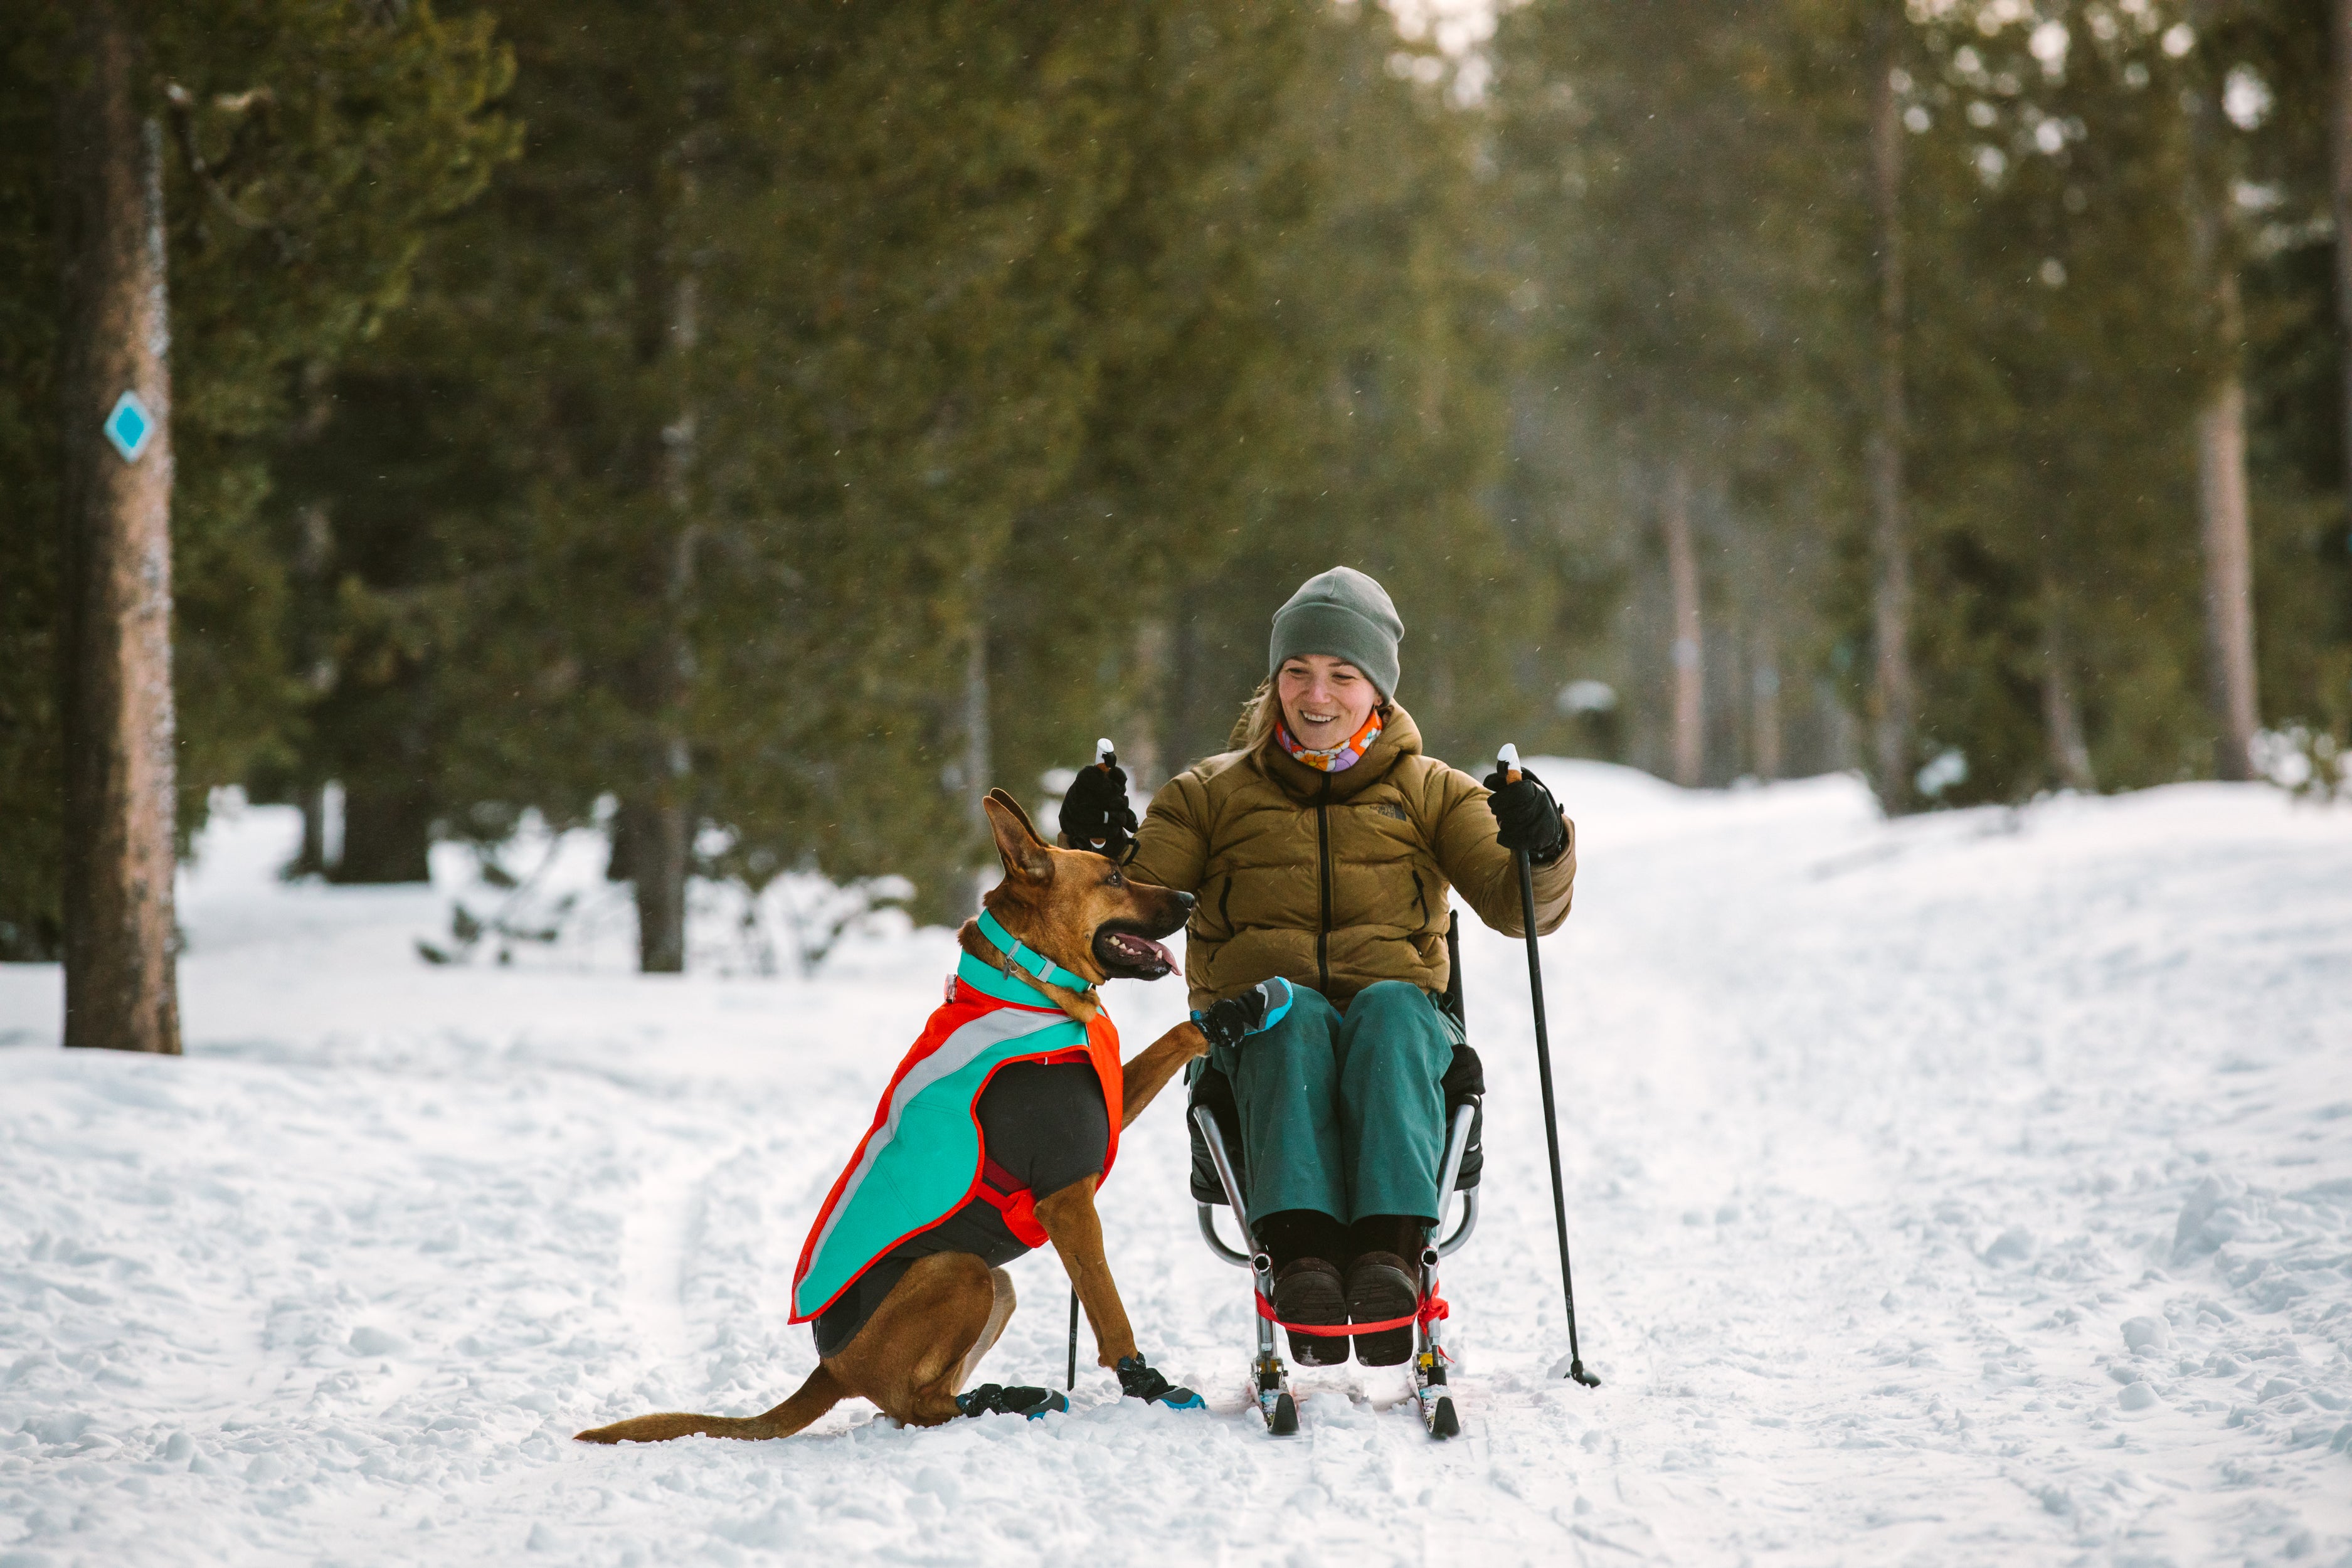 A dog puts his paw on his owner's knee, who is in adaptive skis.